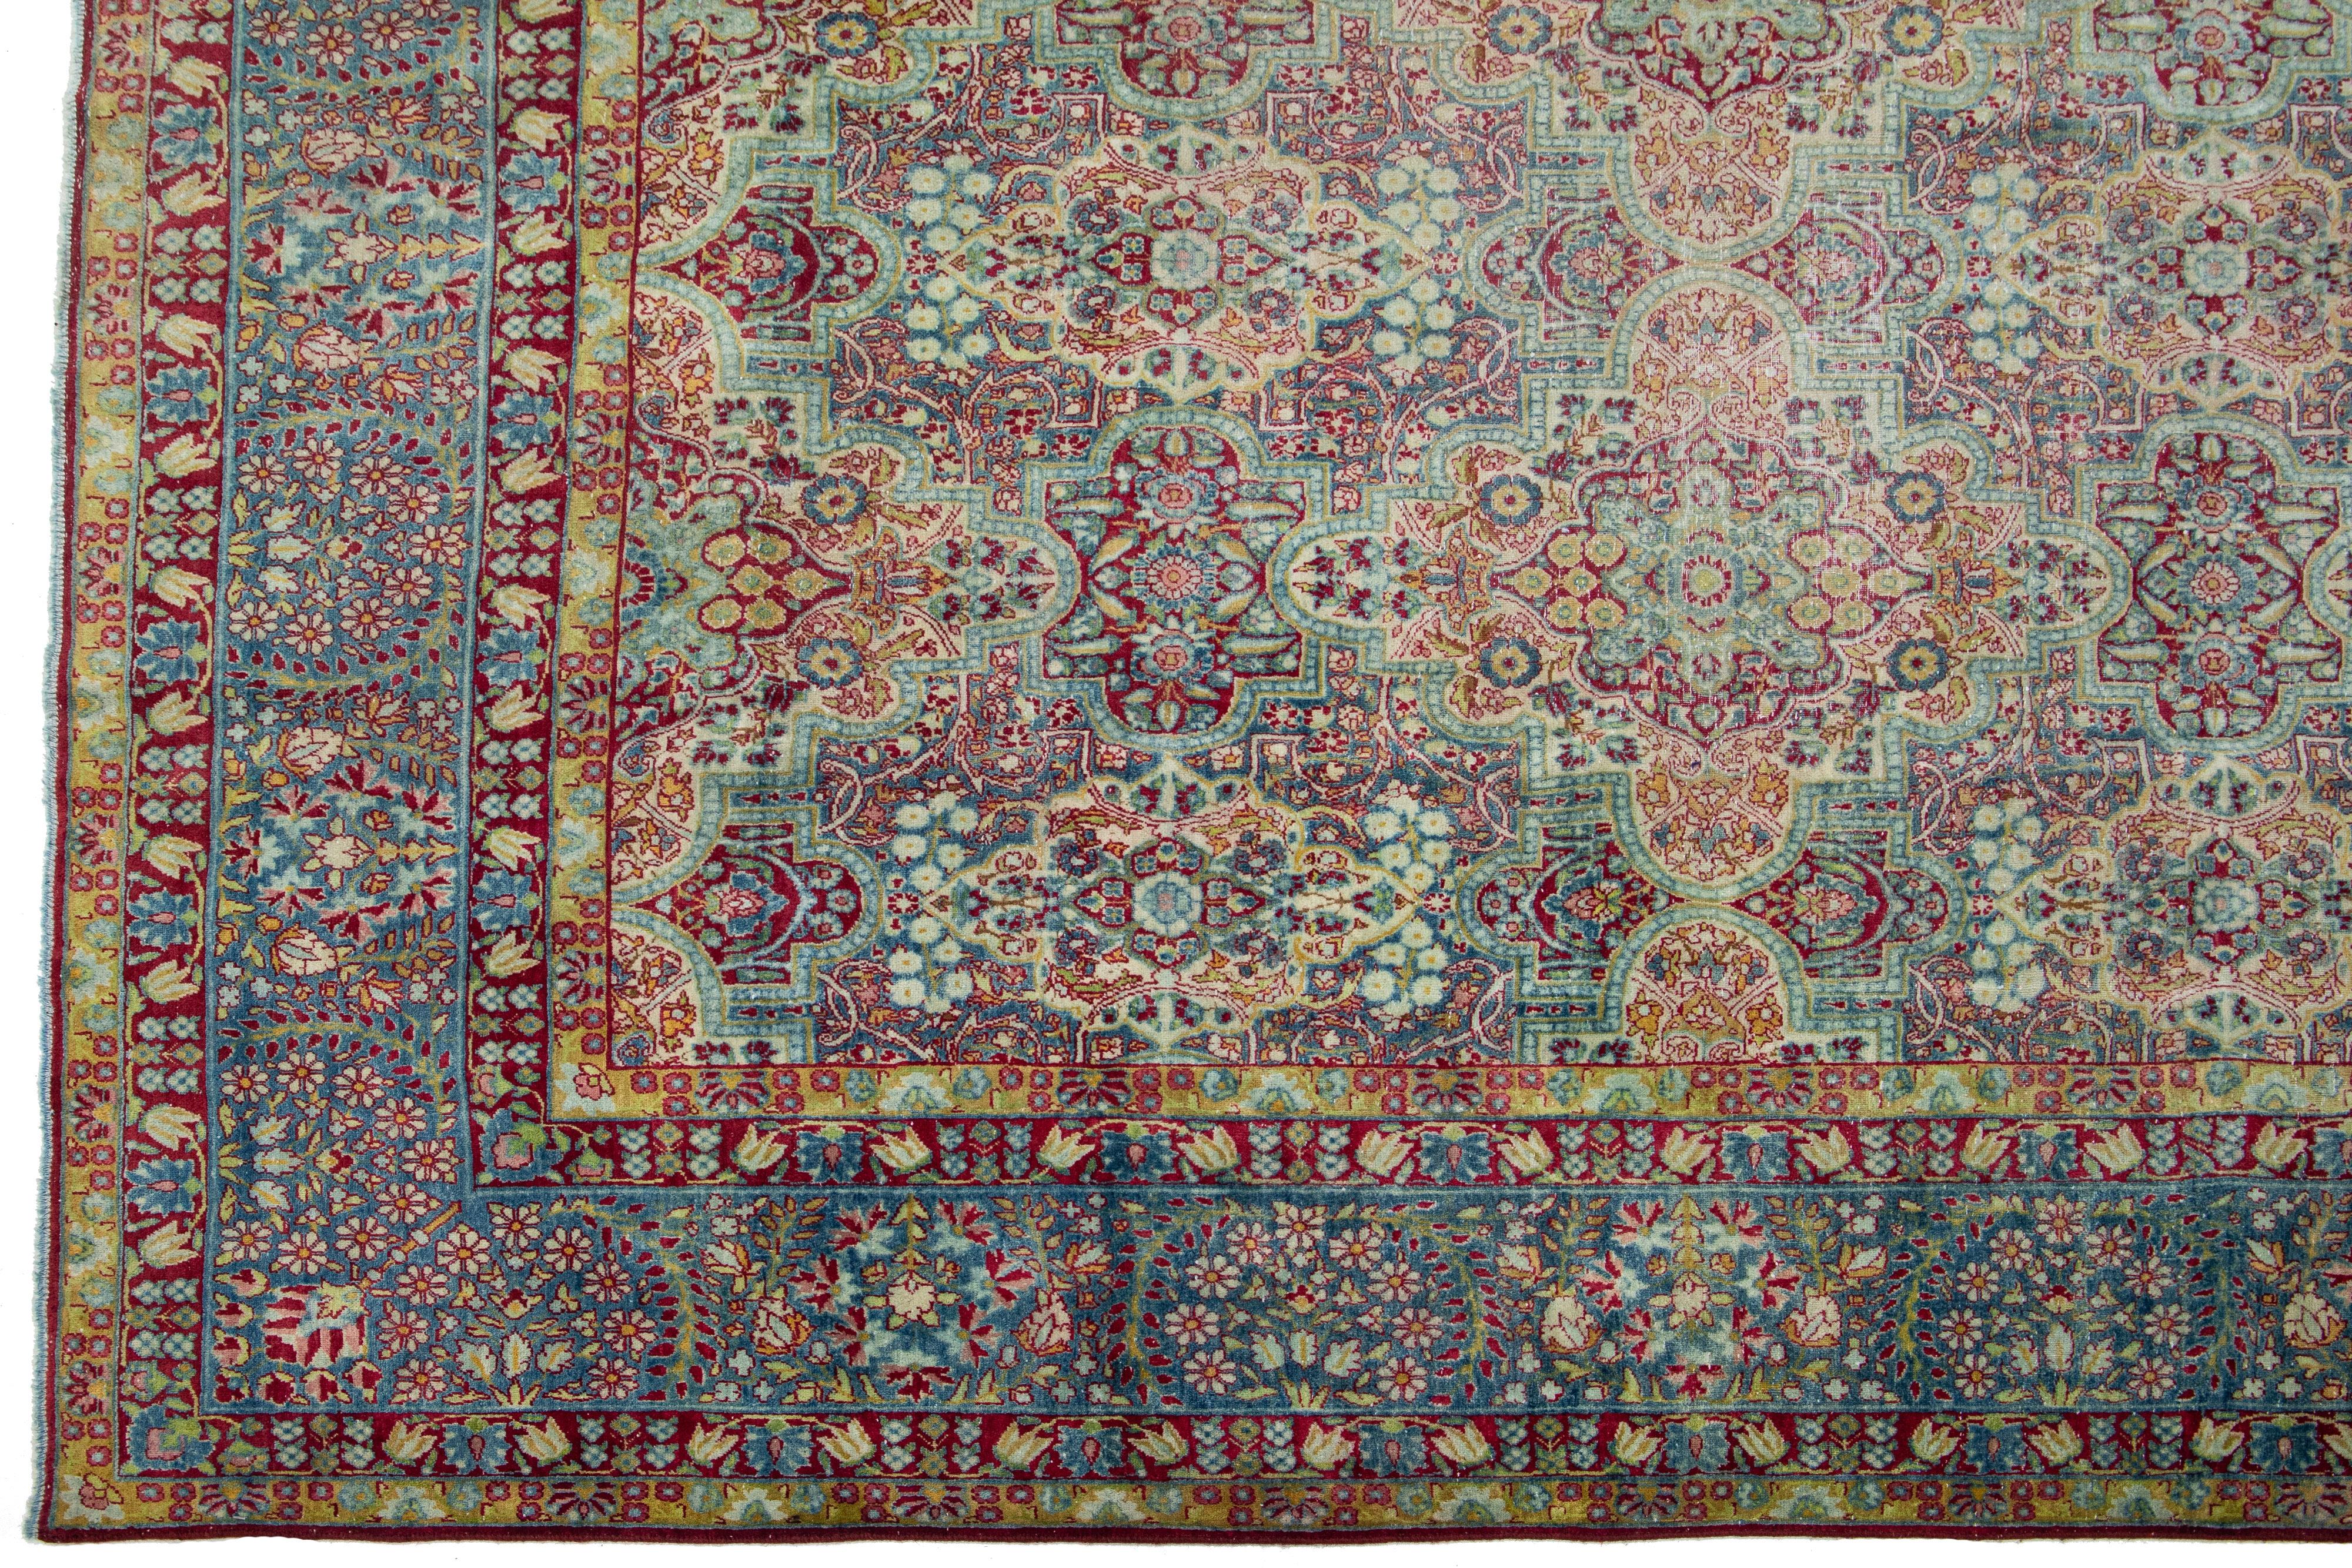 20th Century Blue Persian Tabriz Antique Wool Rug with Allover Floral Motif from the 1900's For Sale